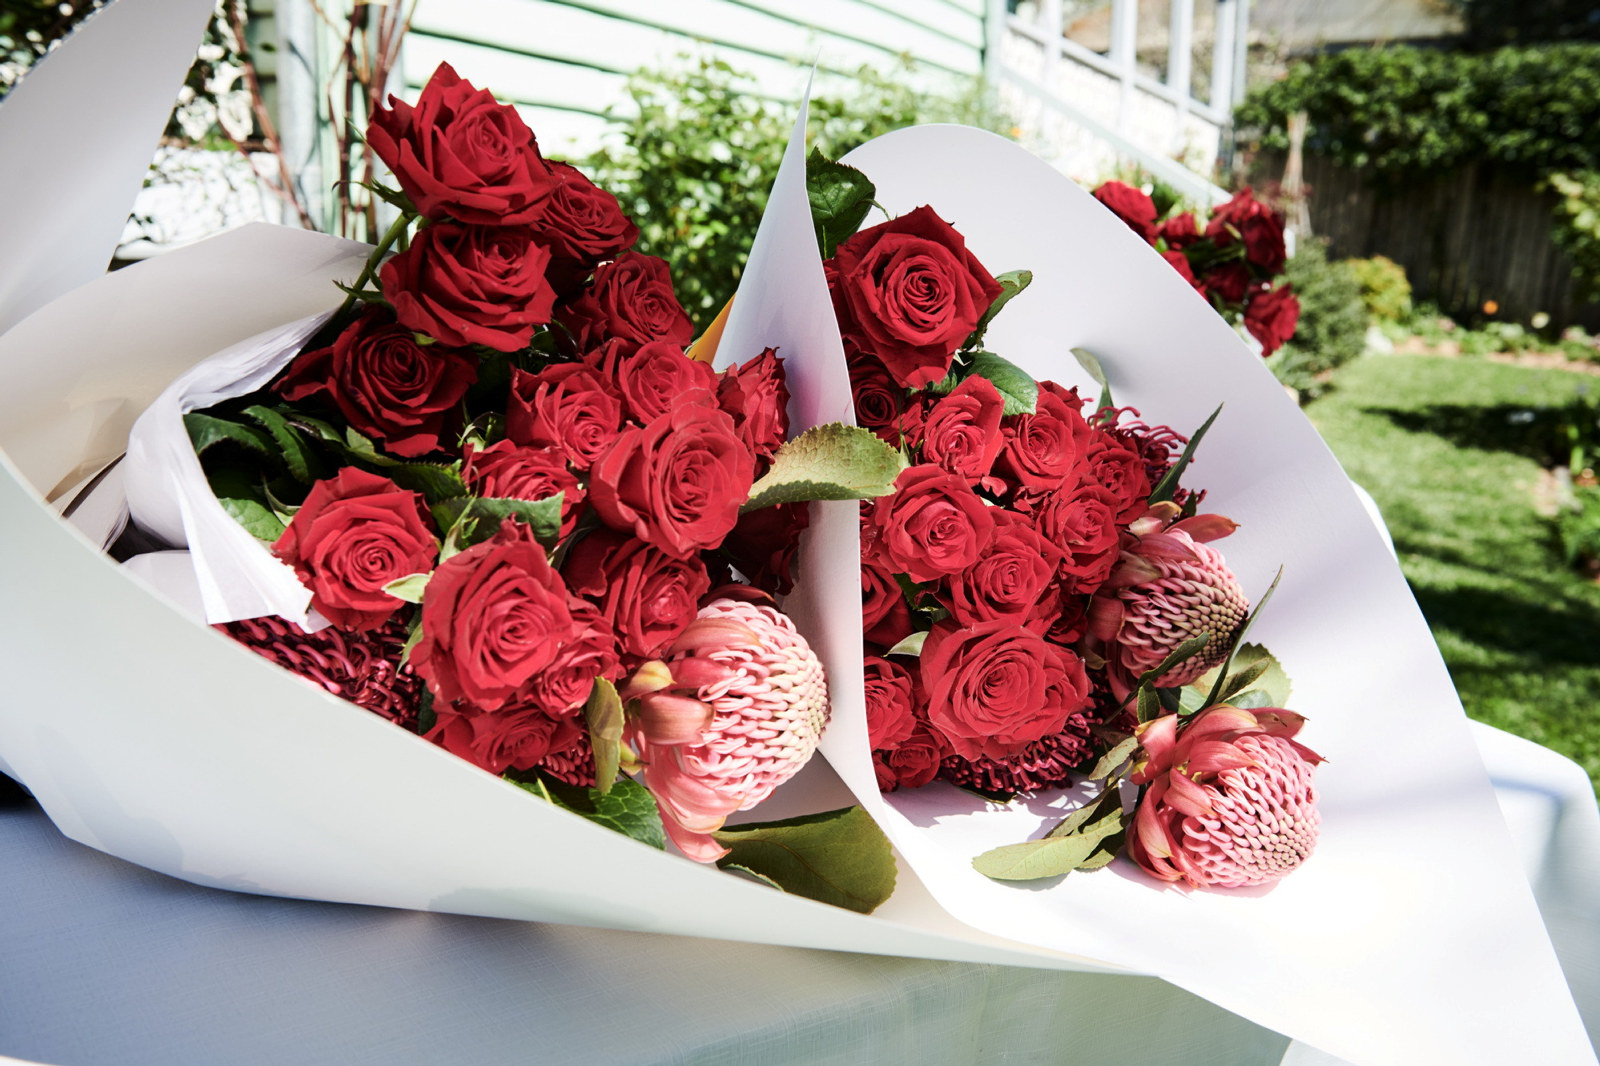 Two bouquets of red flowers and roses wrapped in white paper